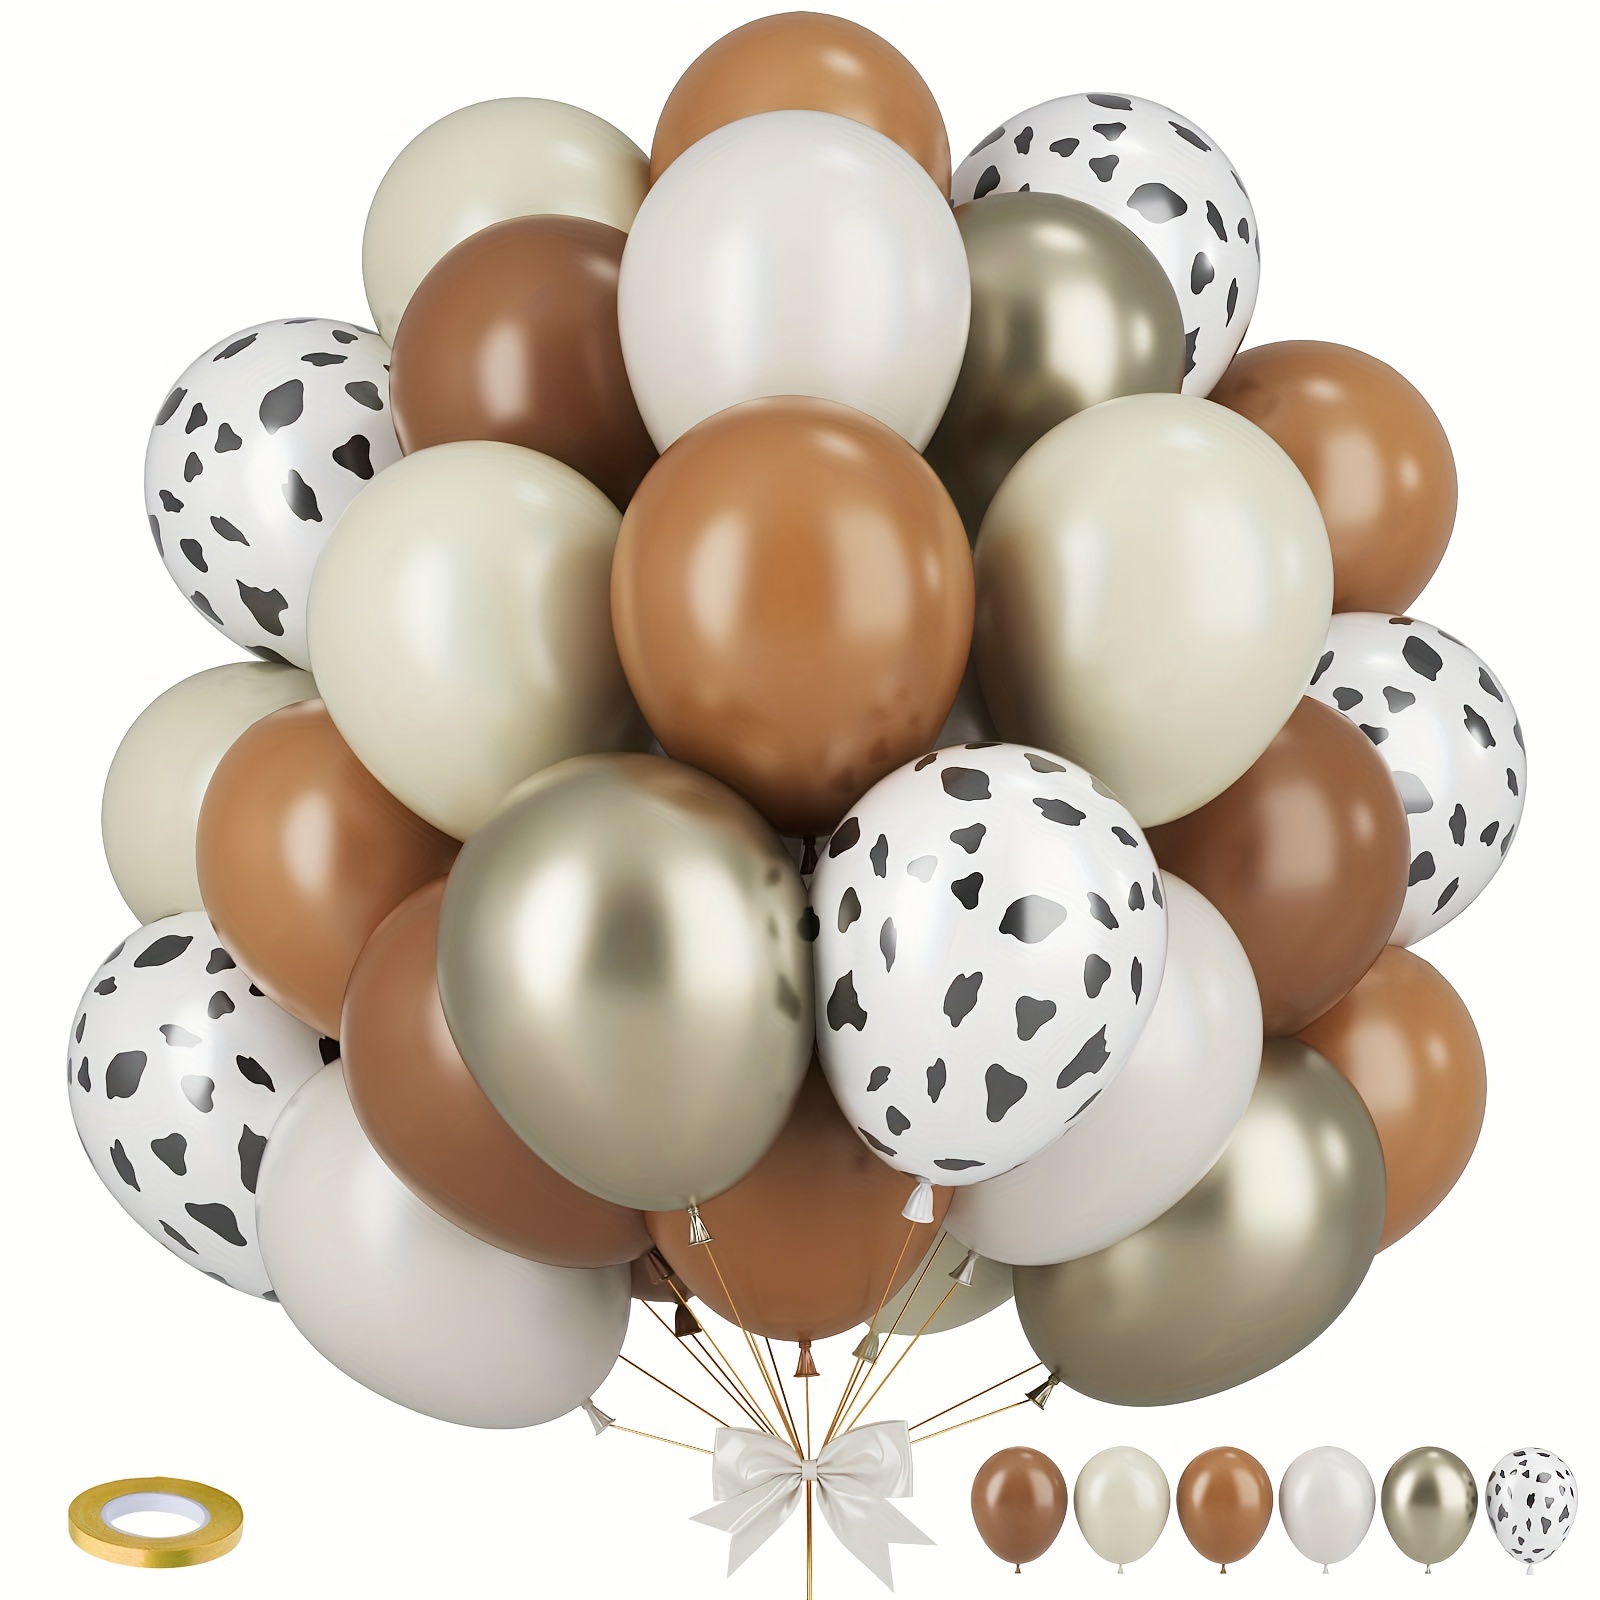 

35pcs 12 Inch Western Cowboy Party Balloons - Black, White, Blush, Brown, Gold - Perfect For Birthdays, Engagements, Weddings, Anniversaries, And More!